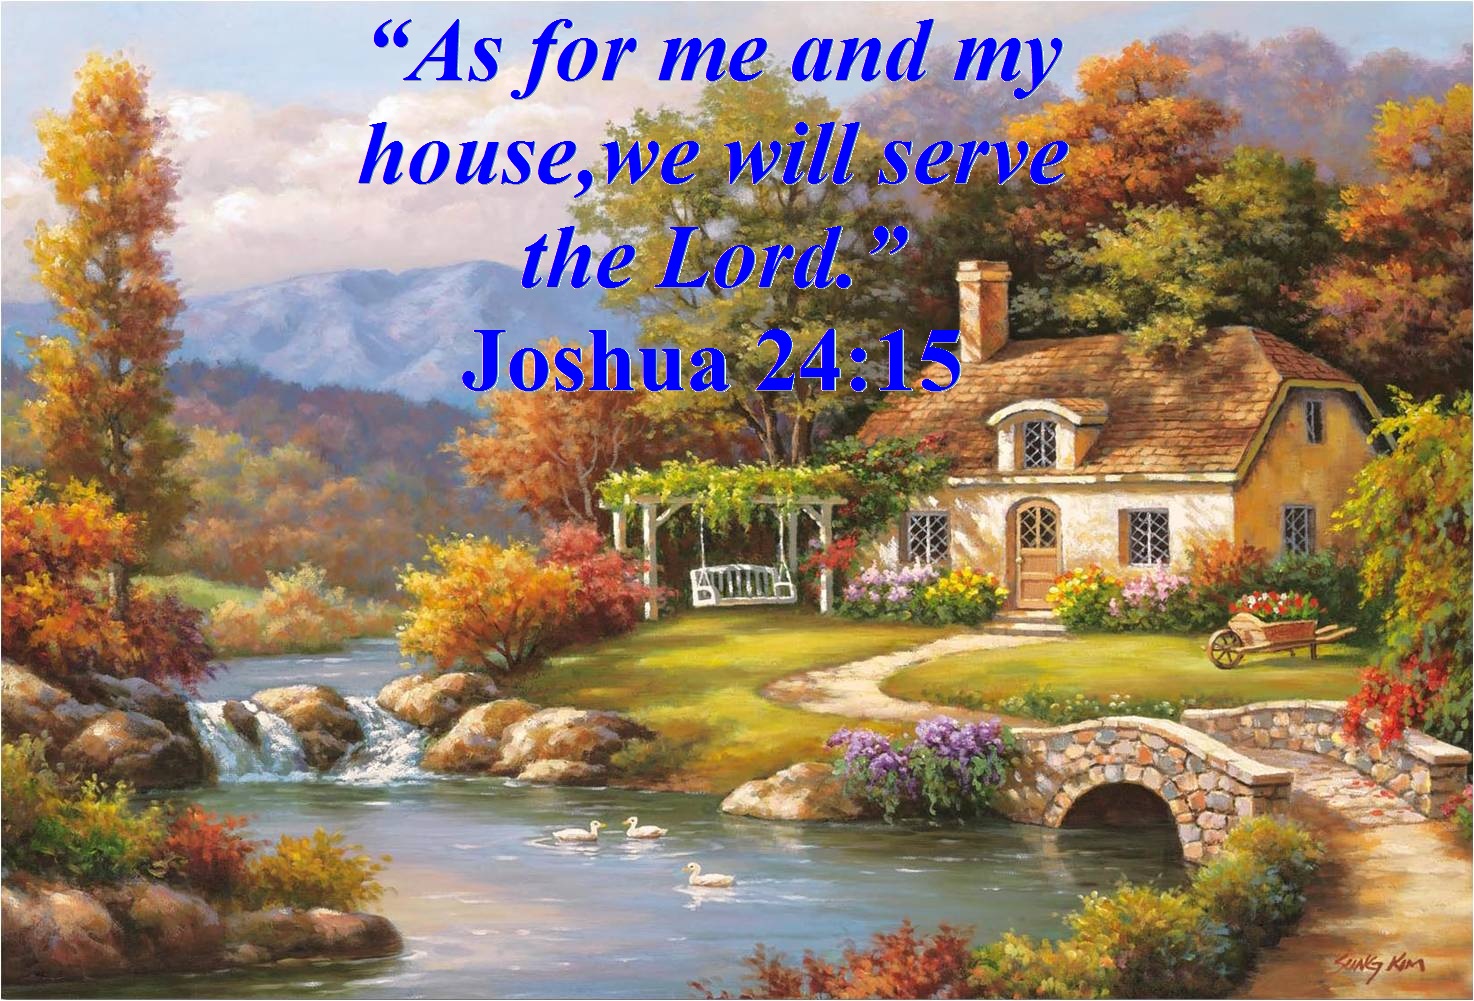 As for me and my house we will serve the LORD Joshua 24:15